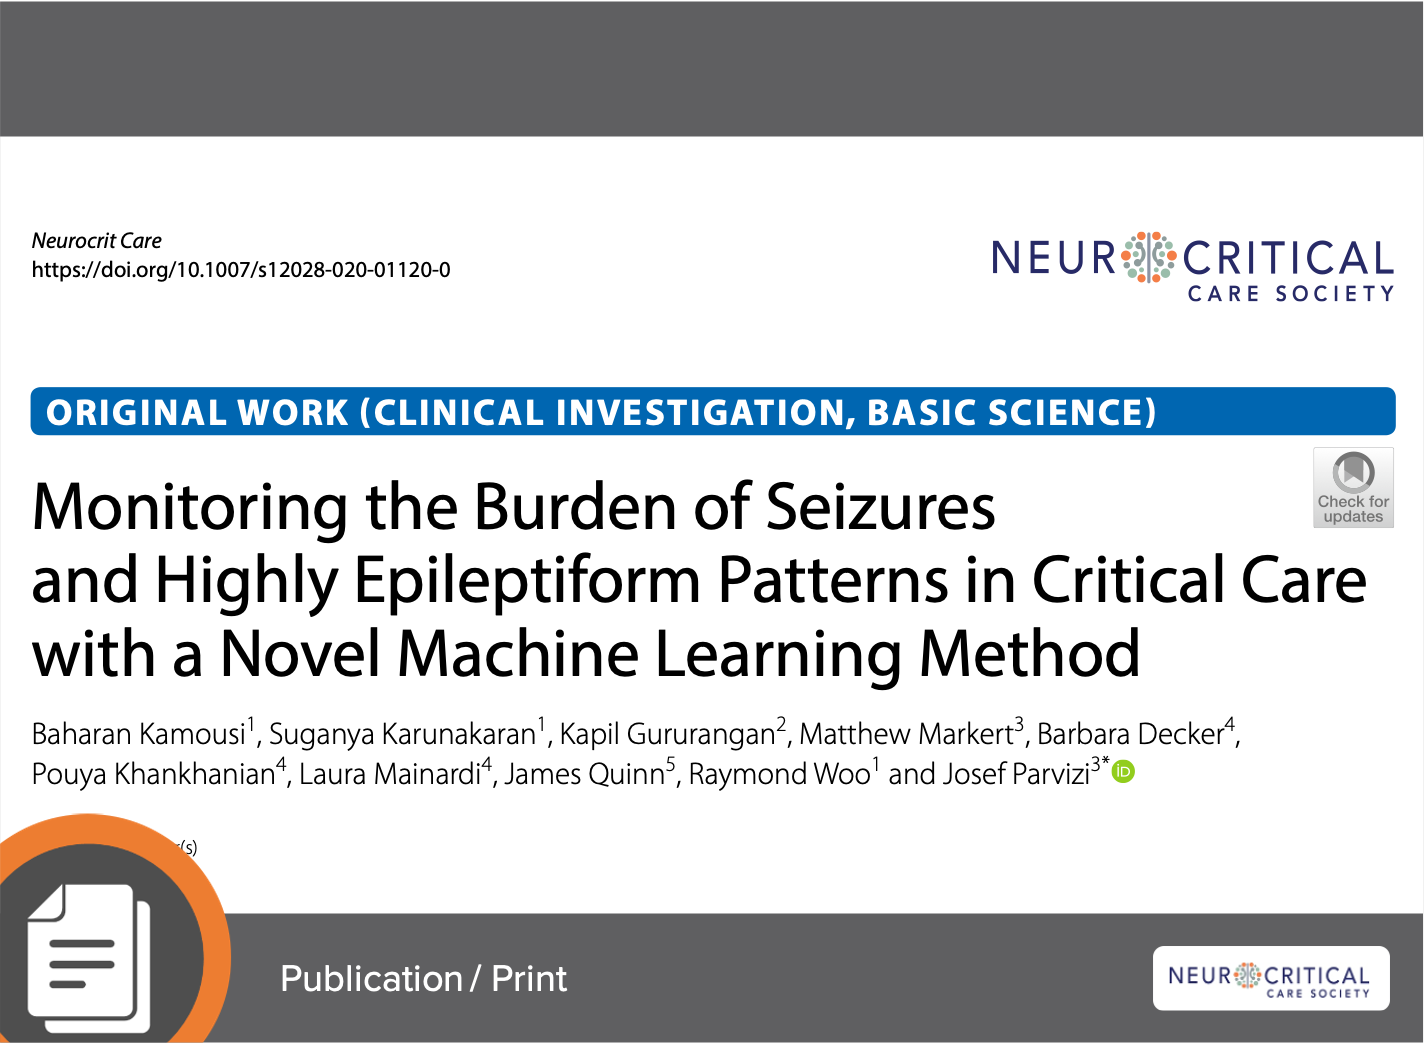 Clarity AI Study Manuscript: Monitoring the Burden of Seizures in Critical Care with a Novel Machine Learning Method